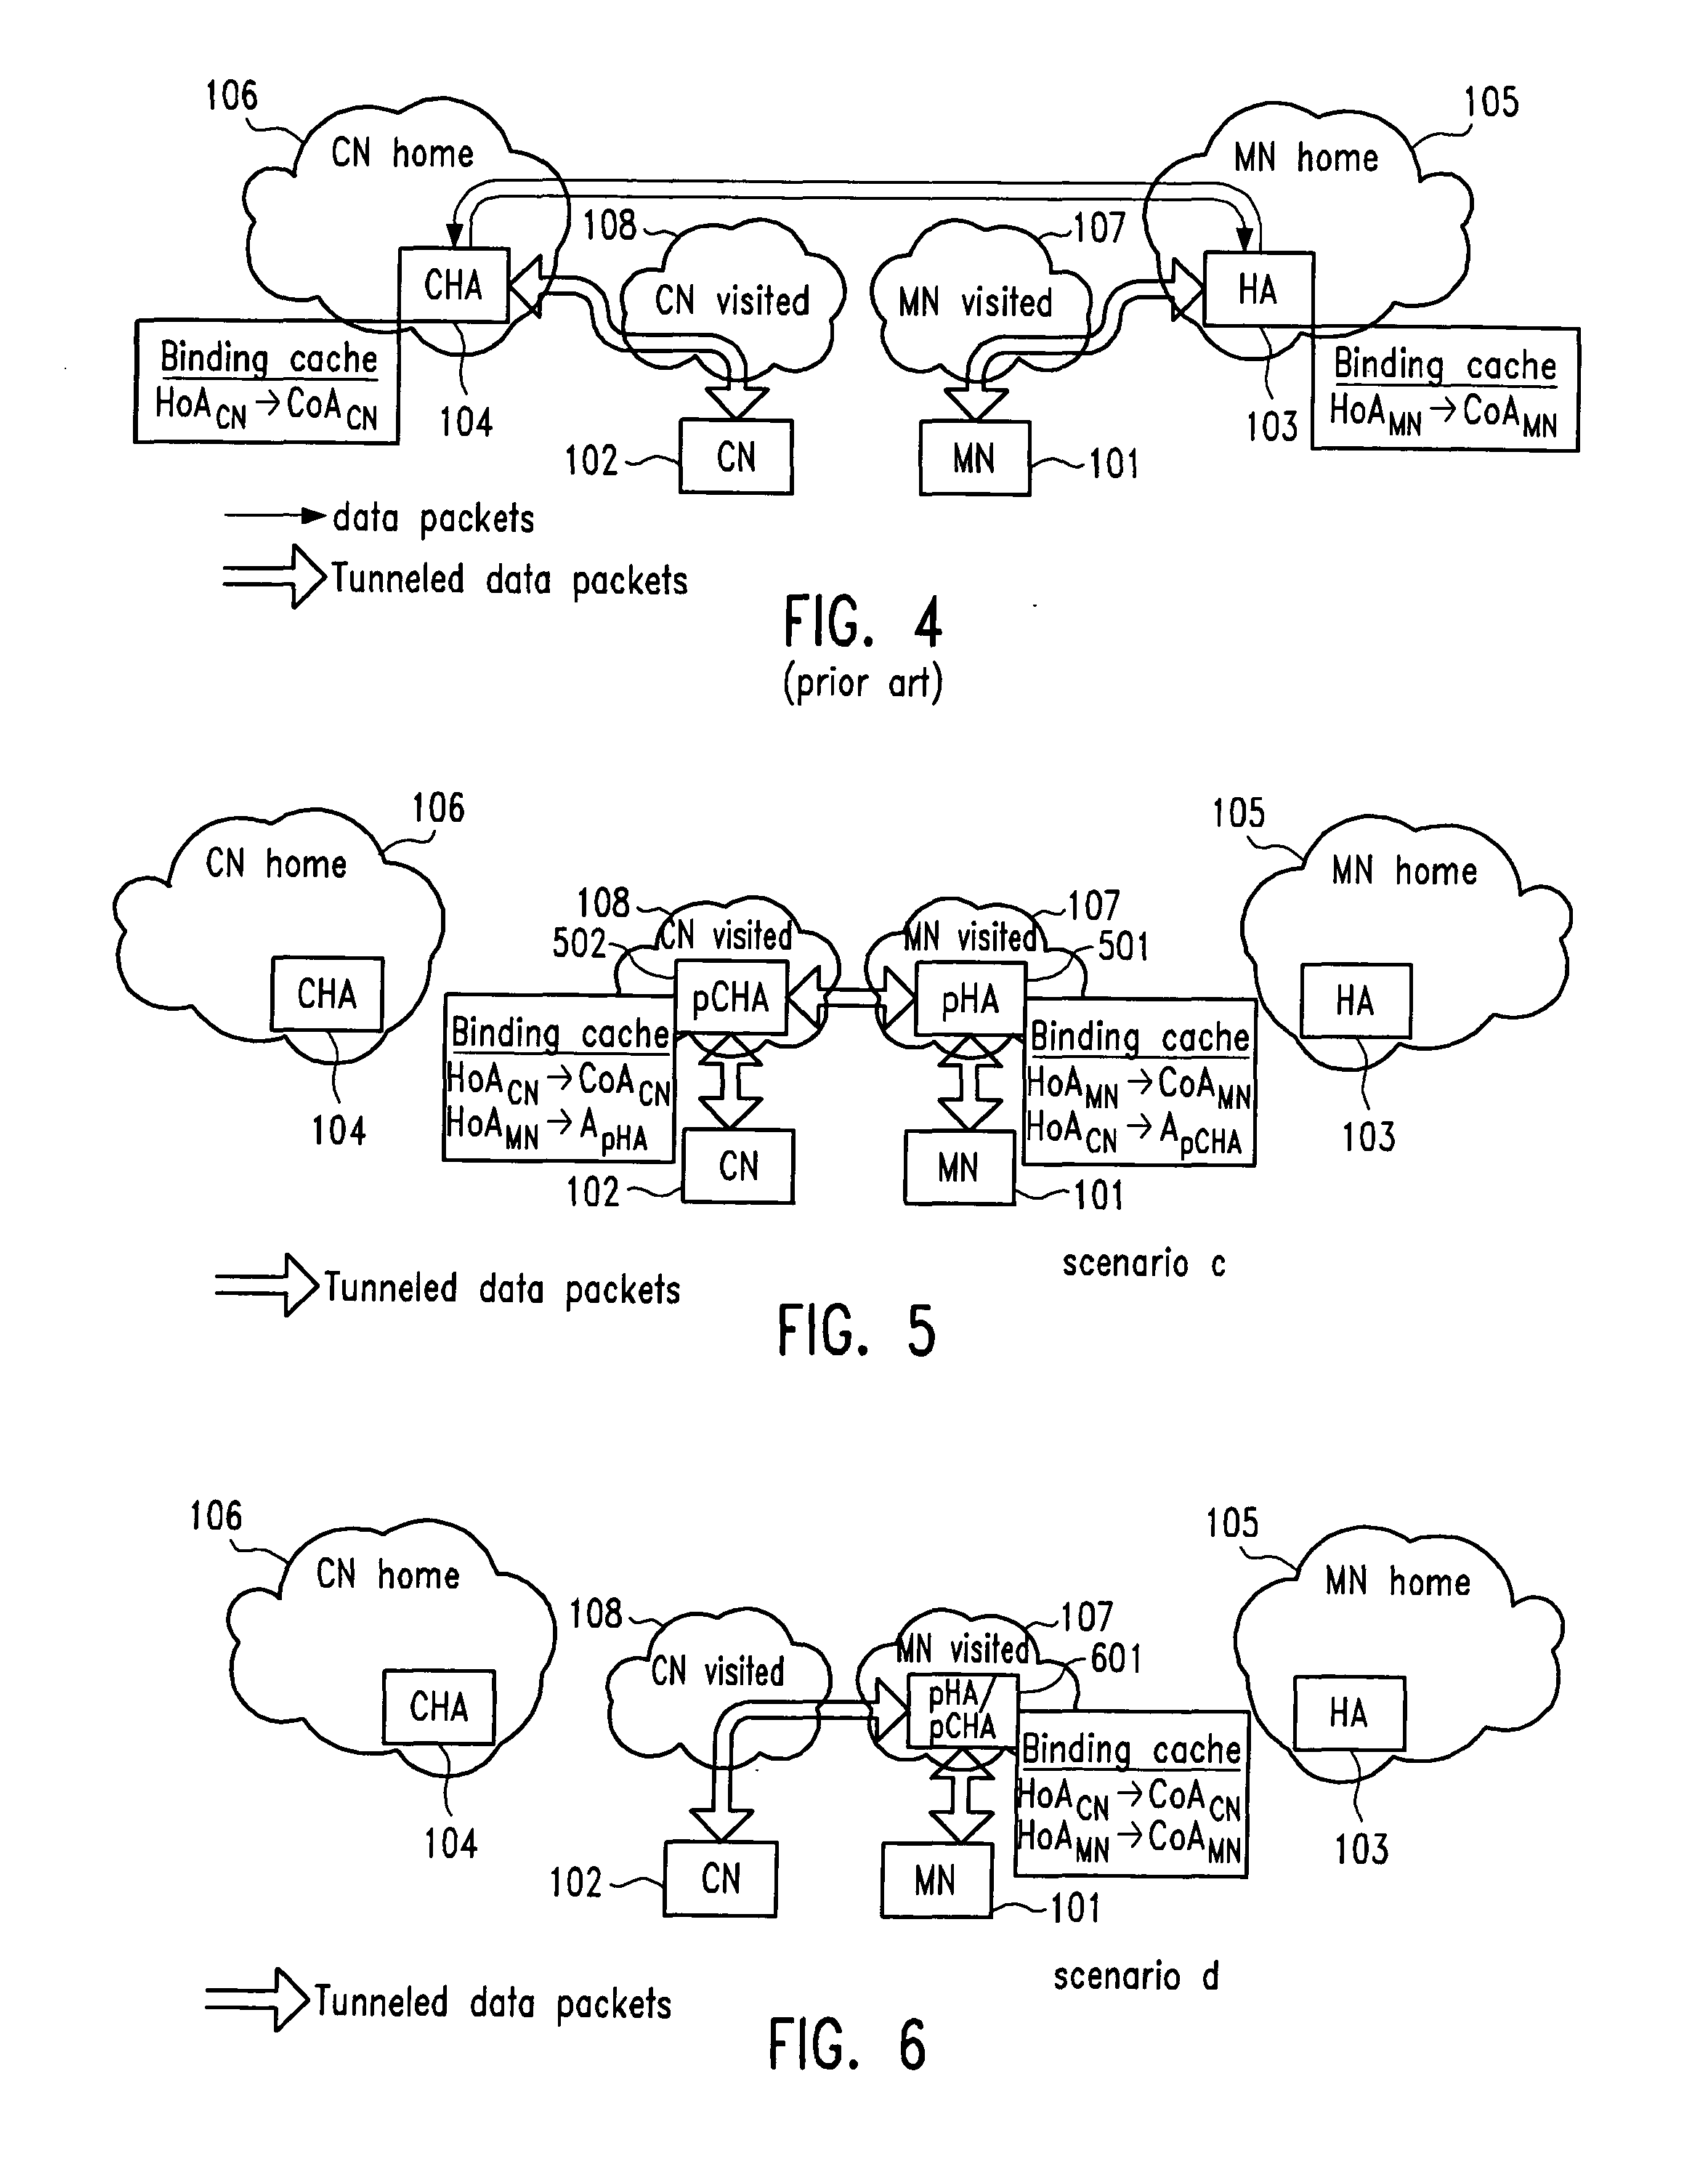 Optimized Reverse Tunnelling for Packet Switched Mobile Communication Systems